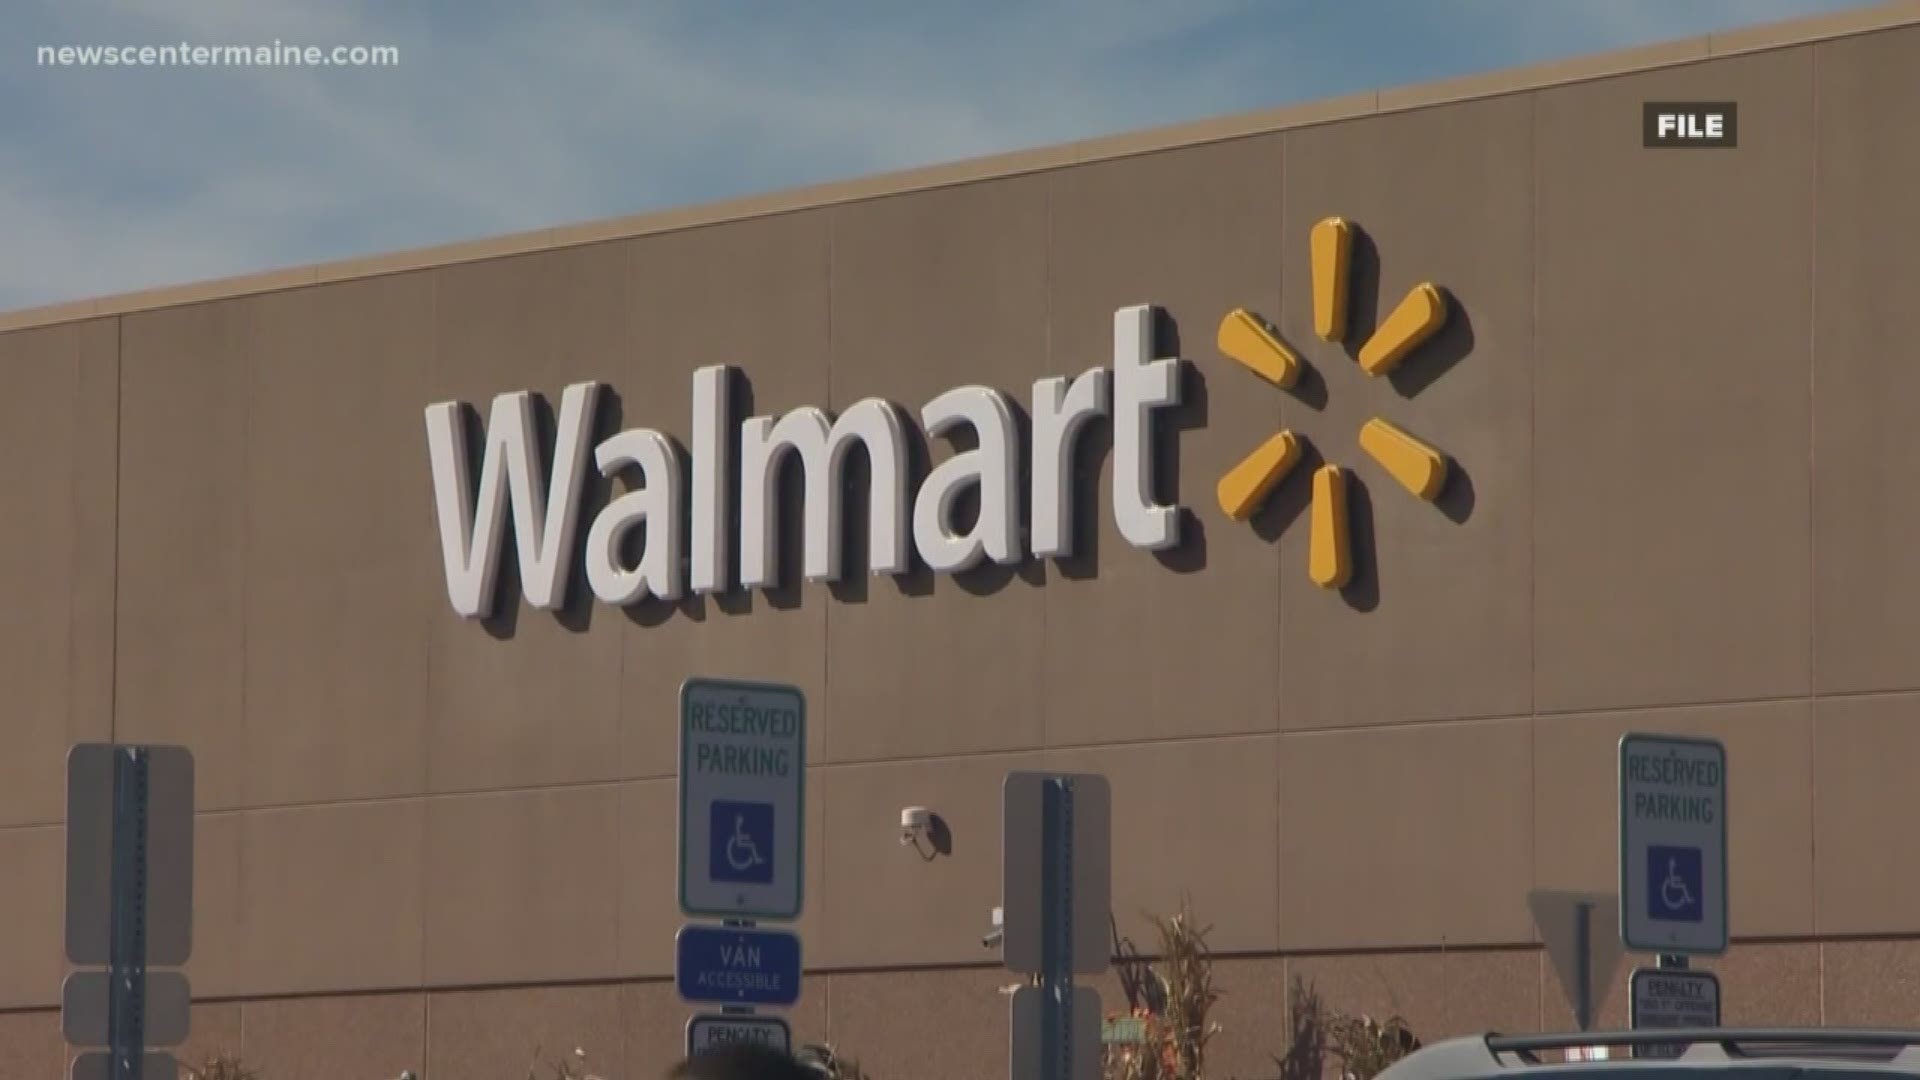 Walmart has agreed to pay $80,000 and implement nationwide changes to its job reassignment policy after a disability lawsuit.